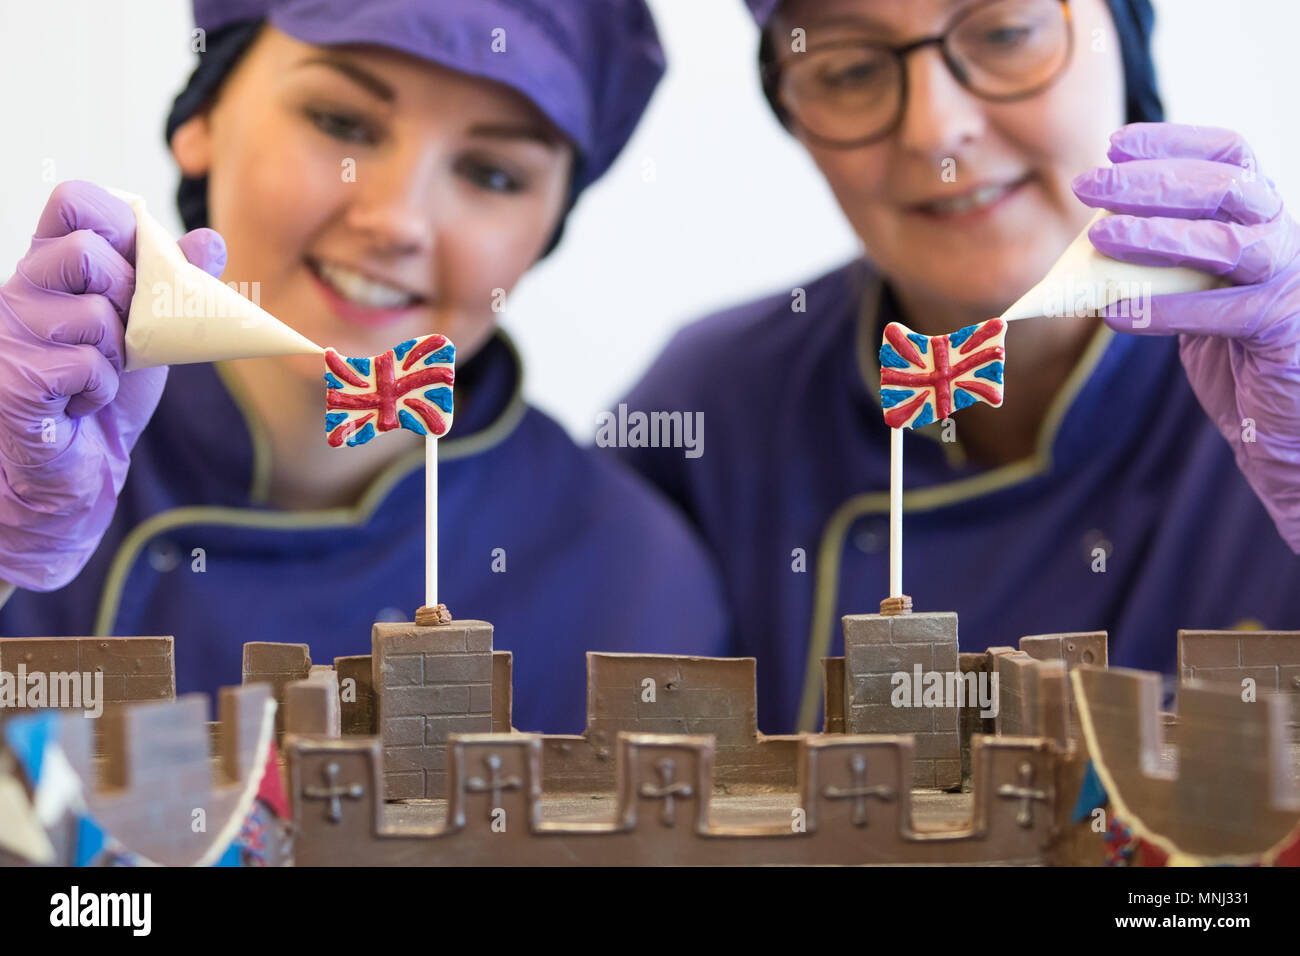 Chocolatiers pipe the finishing touches onto the front of Windsor Castle at Cadbury World in Birmingham, which is made entirely out of chocolate and includes the Henry VIII gate with a hand-piped picture of St George's Chapel visible through it, ahead of the royal wedding this weekend. Stock Photo